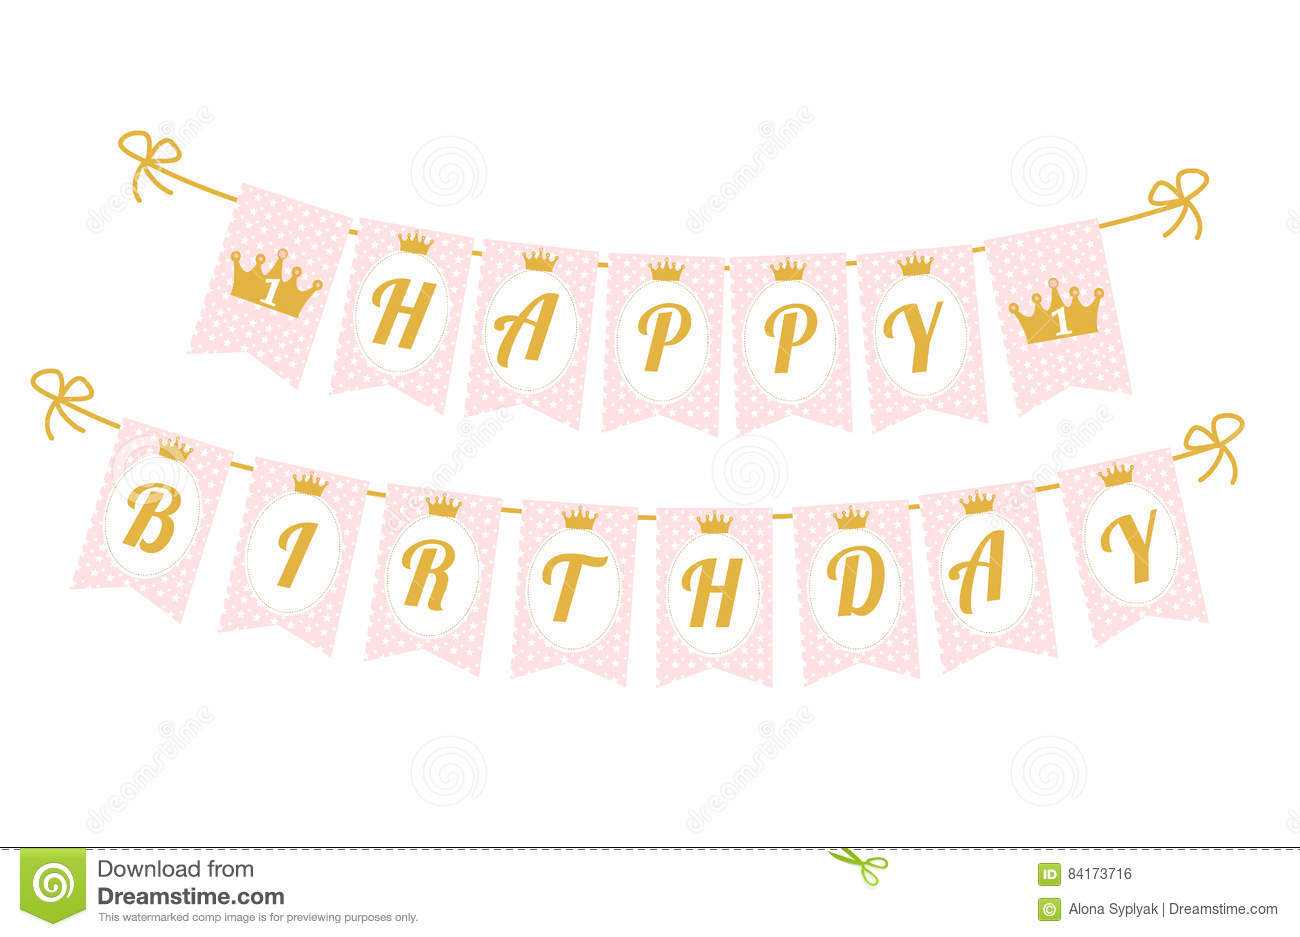 Cute Pennant Banner As Flags With Letters Happy Birthday In For Printable Letter Templates For Banners